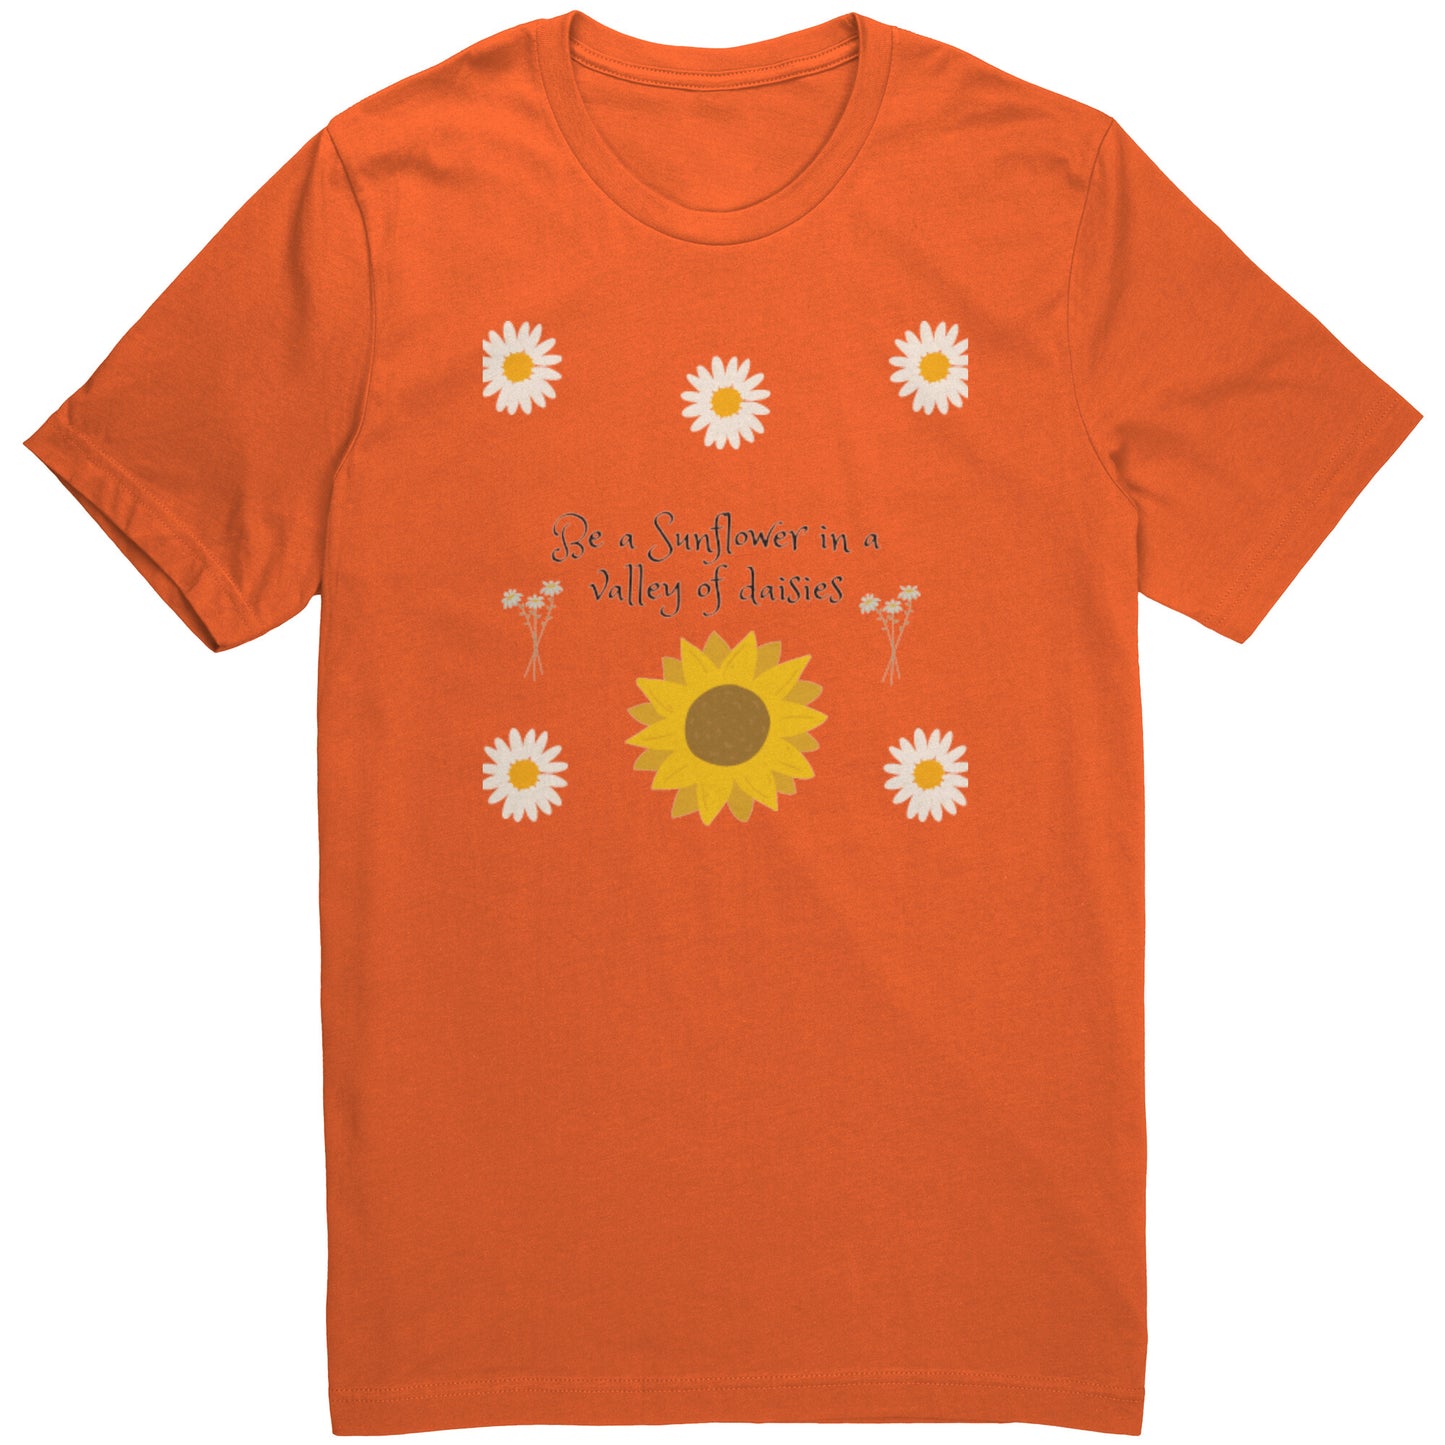 Out of the Daisies Adult Unisex T-shirt